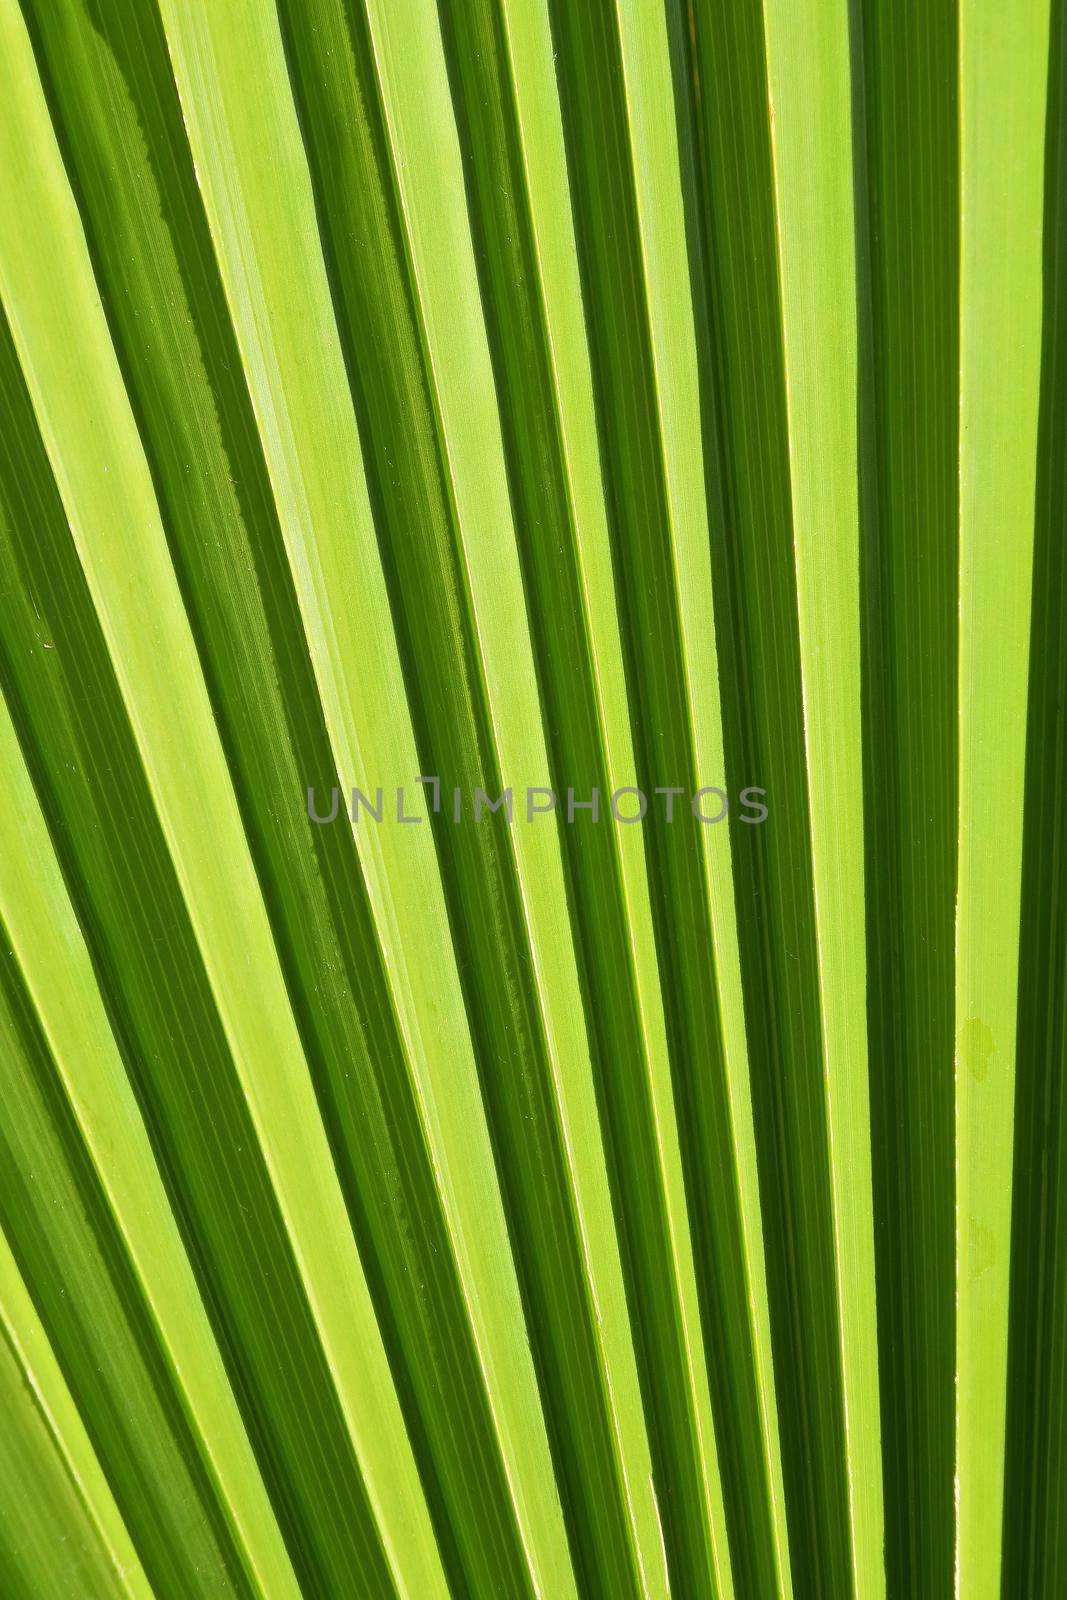 Extreme close up texture of green palm leaf veins by BreakingTheWalls